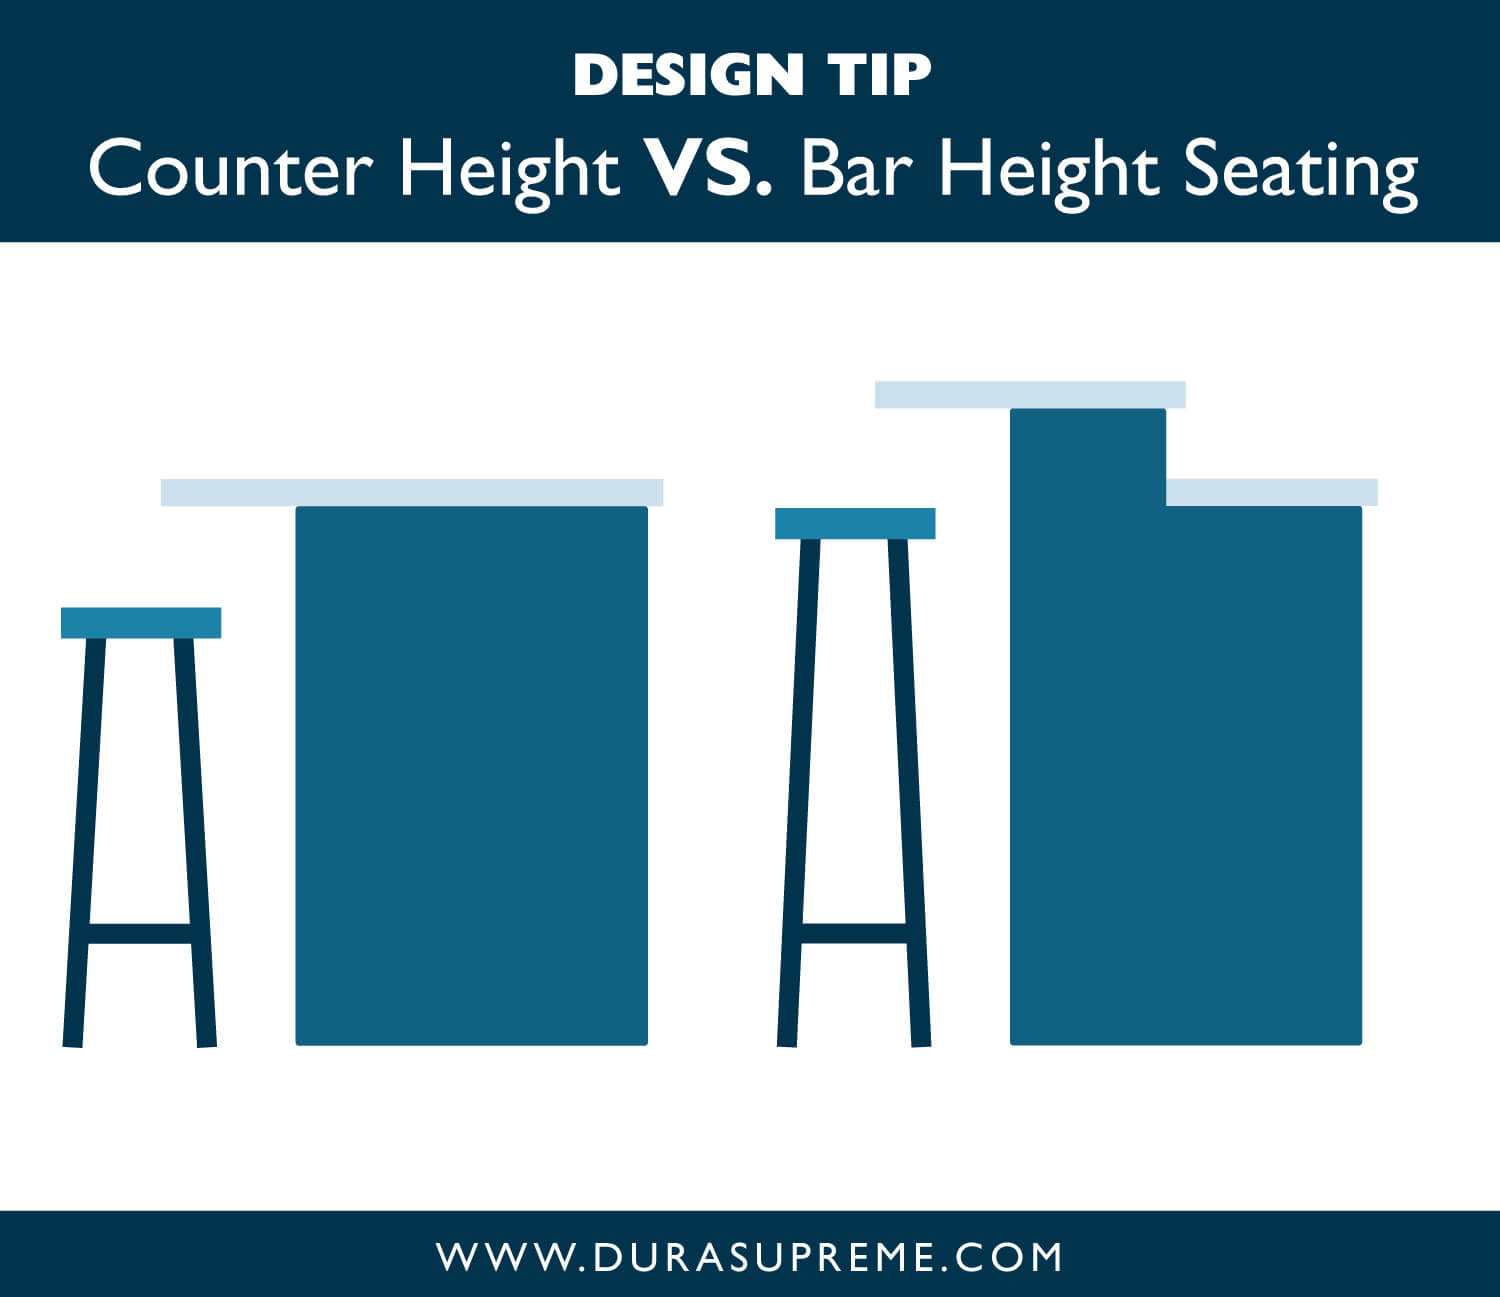 Kitchen design tip: Countertop Height VS. Bar Height Seating